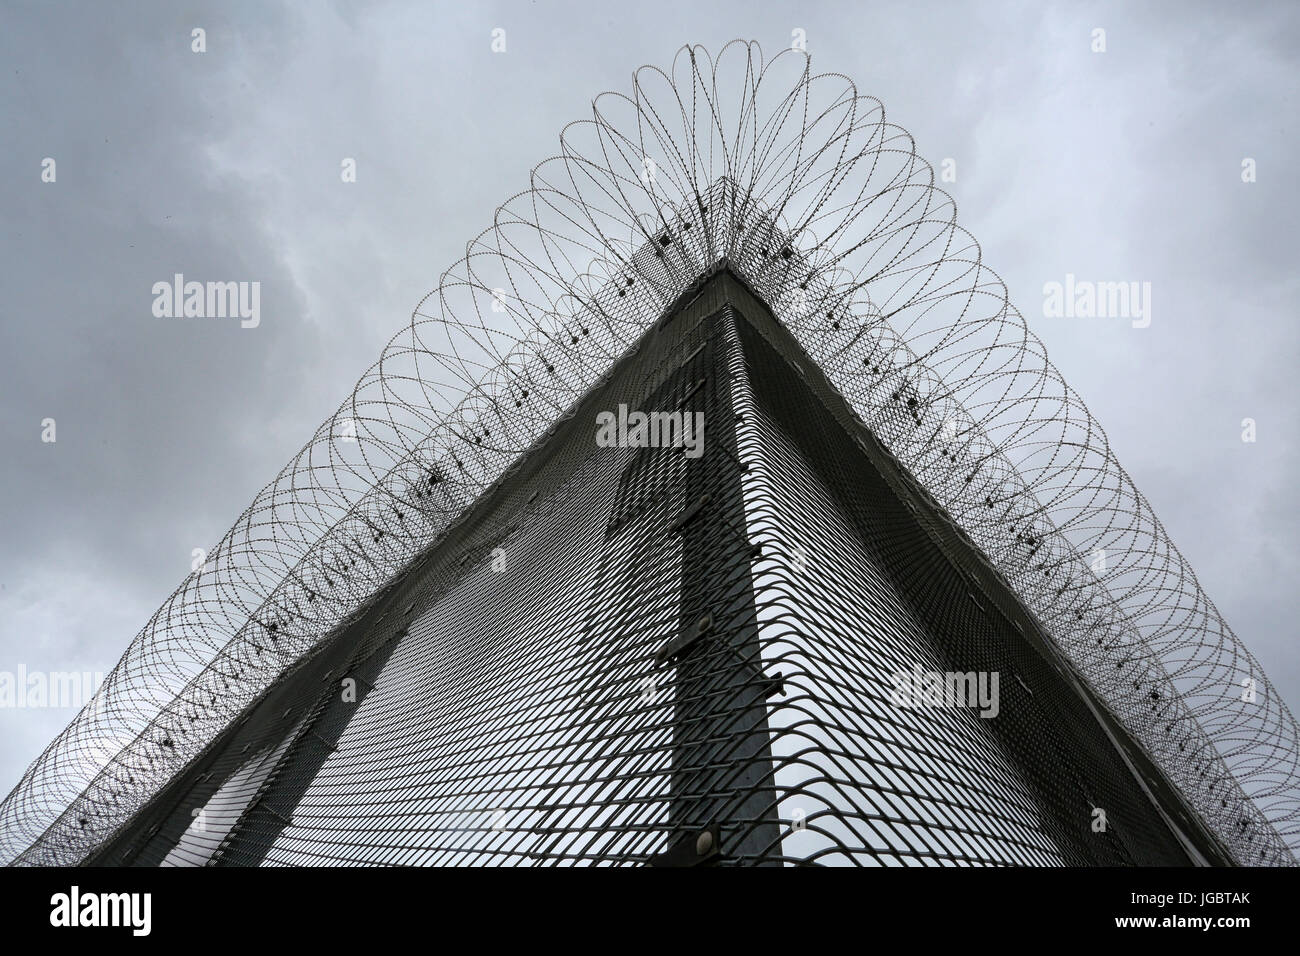 Security fence with barbed wire, Prison, Bautzen, Saxony, Germany Stock Photo